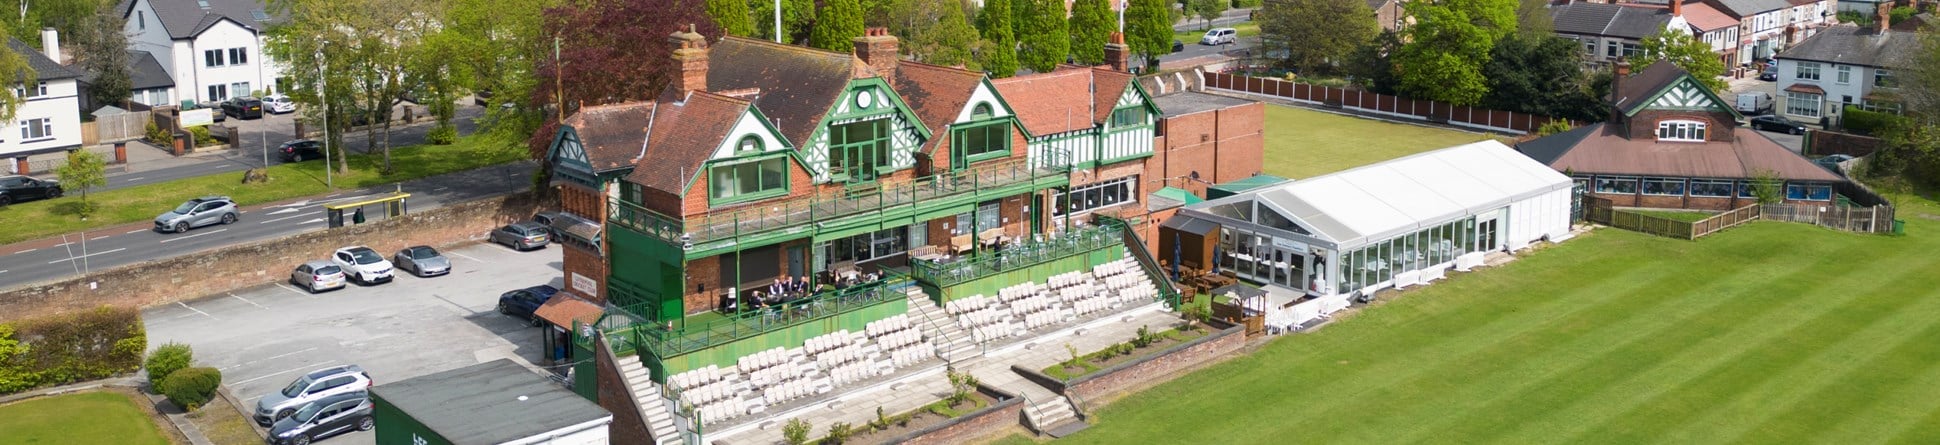 A cricket pavilion and the edge of the cricket pitch as viewed from above